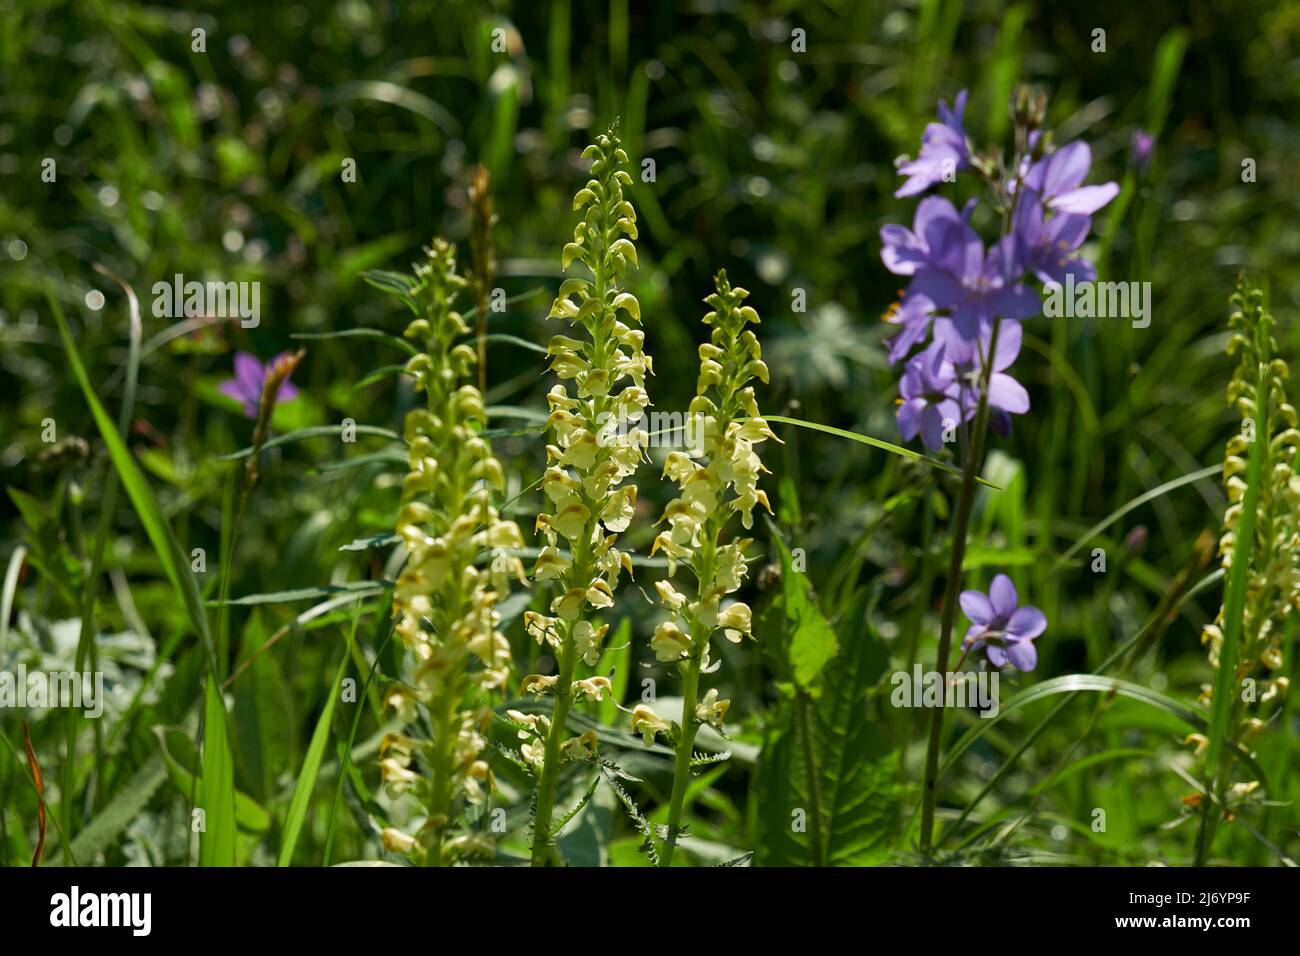 Pedicularis incarnata, the flowering plant belonging to the family Orobanchaceae in natural sub-alpine environment. Altai mountains. Stock Photo